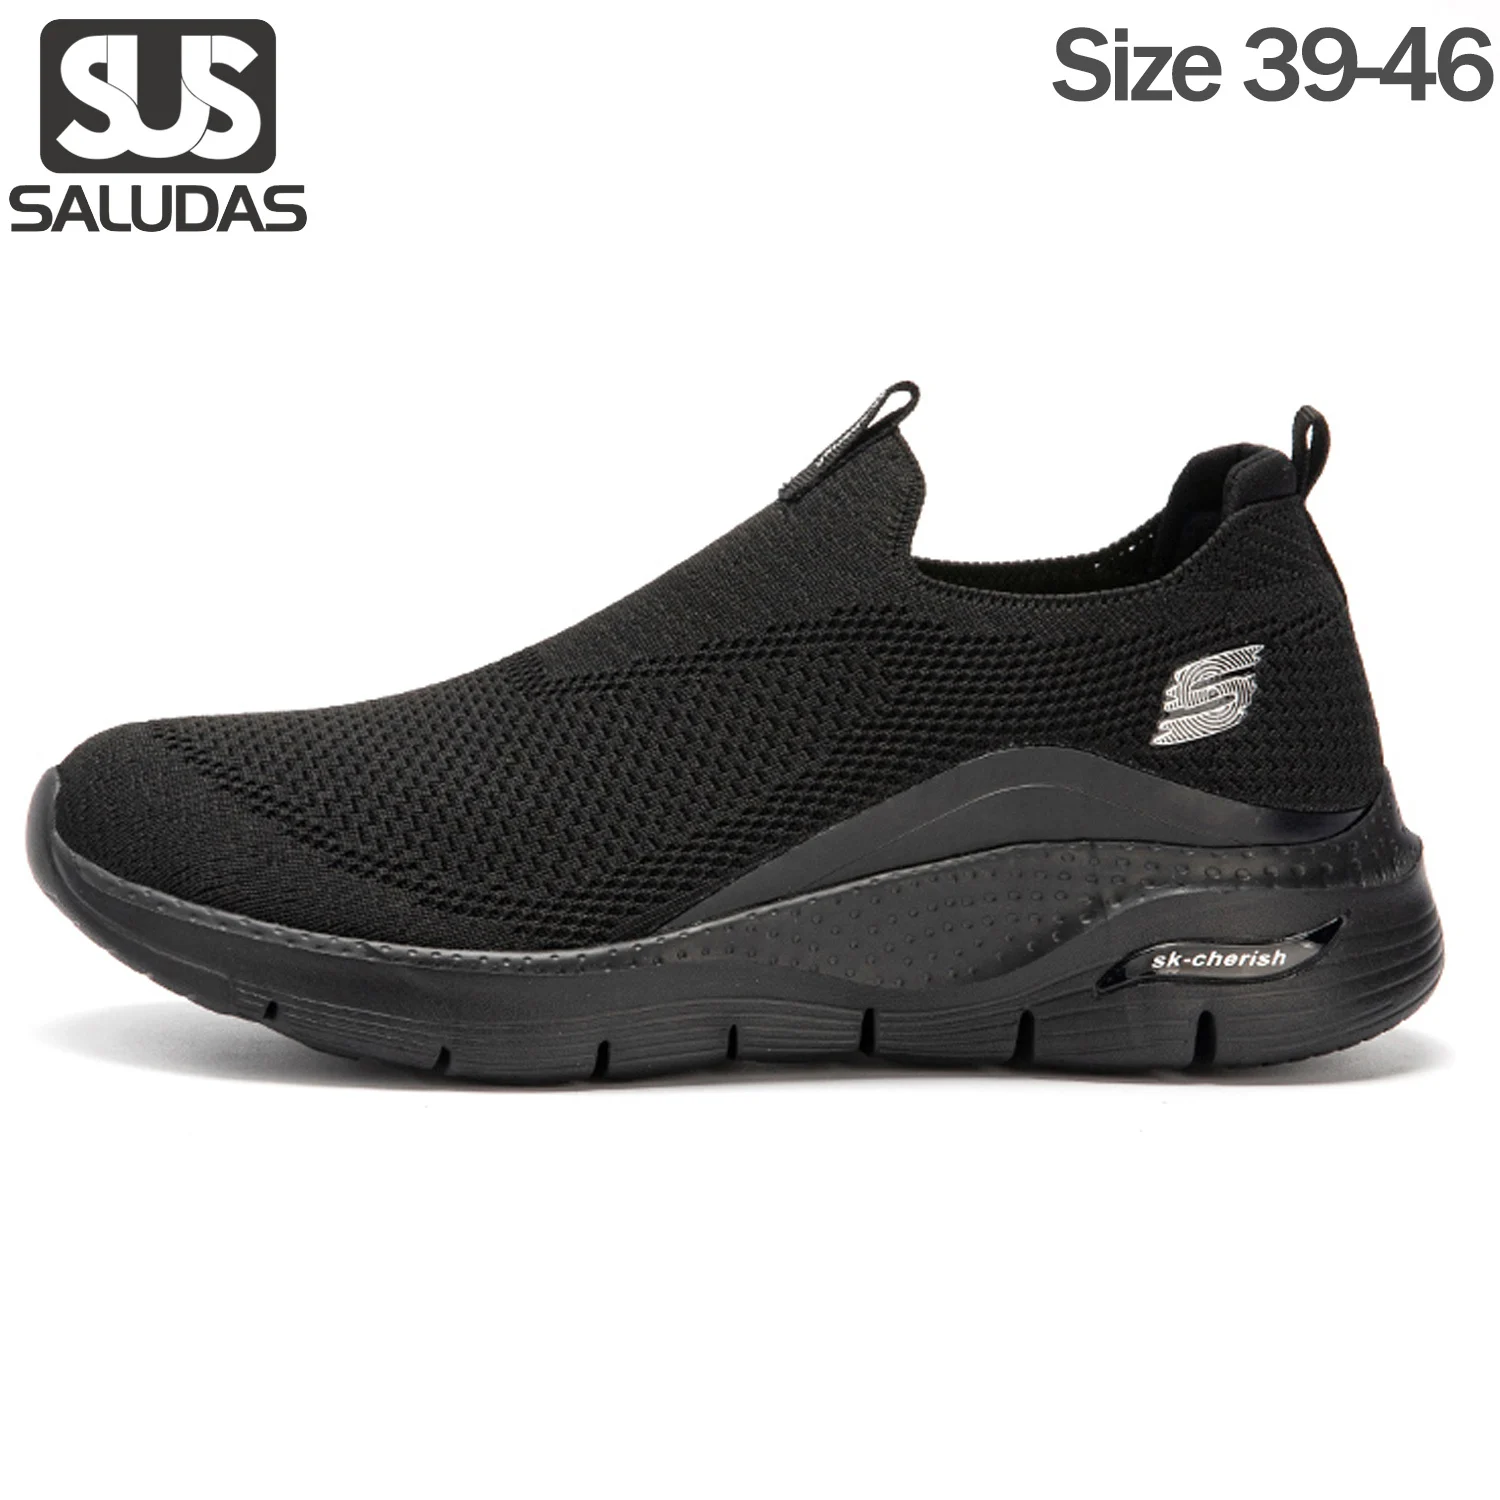 

SALUDAS Men Sports Shoes Luxury Brand Male Shoes Fashion Tennis Runners Sneakers Trends Slip-on Casual Shoes Men Athletic Shoes